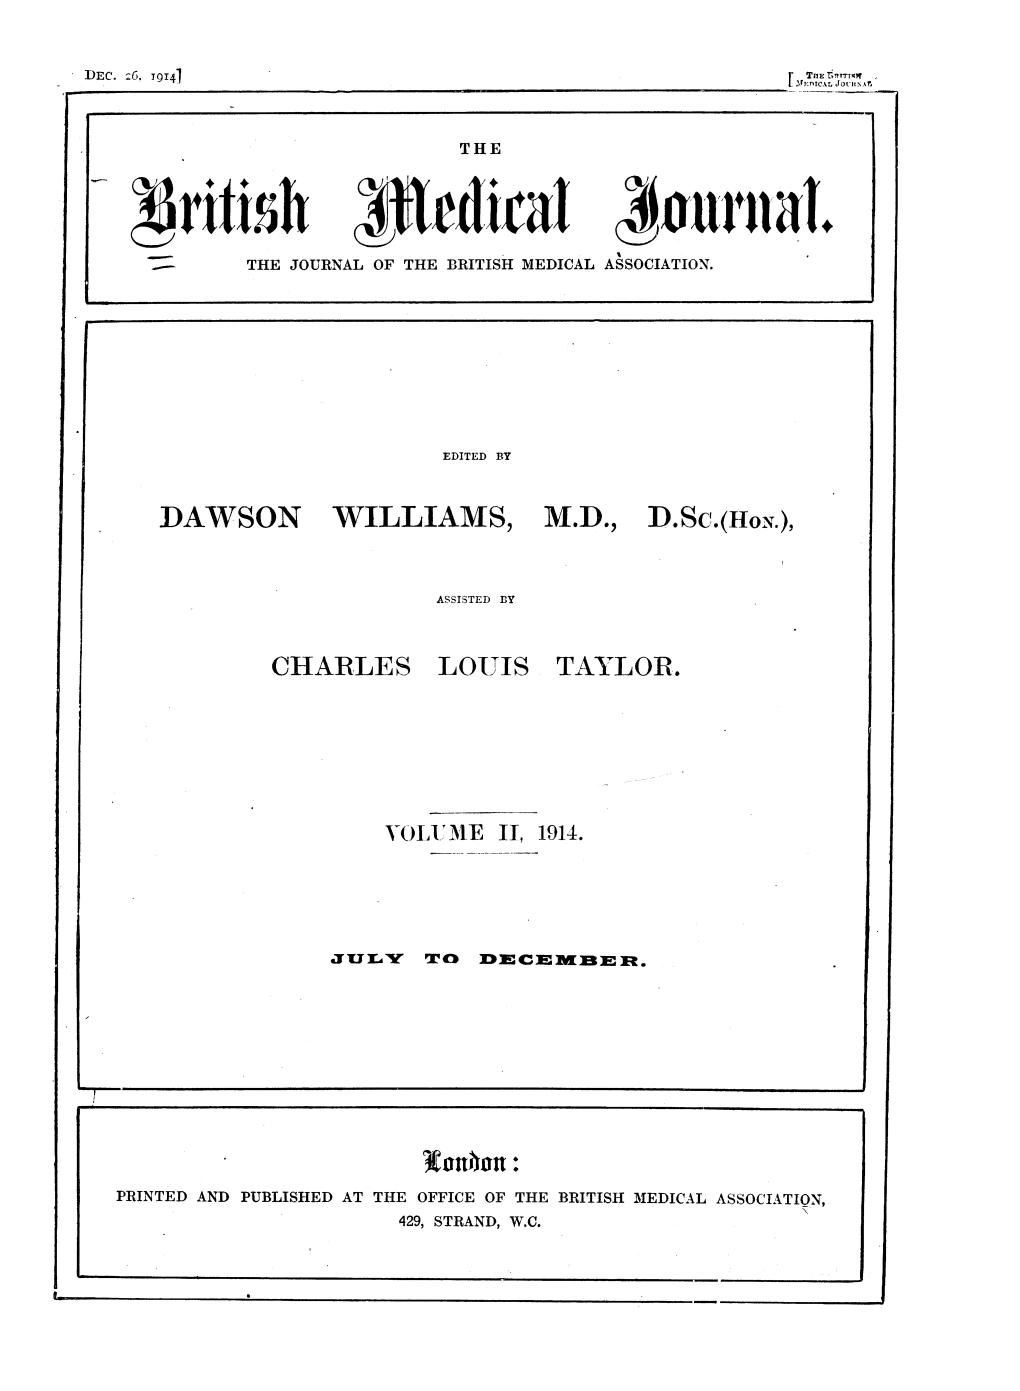 Itii1i 7*1Edkai Qurhiat. the JOURNAL of the BRITISH MEDICAL ASSOCIATION